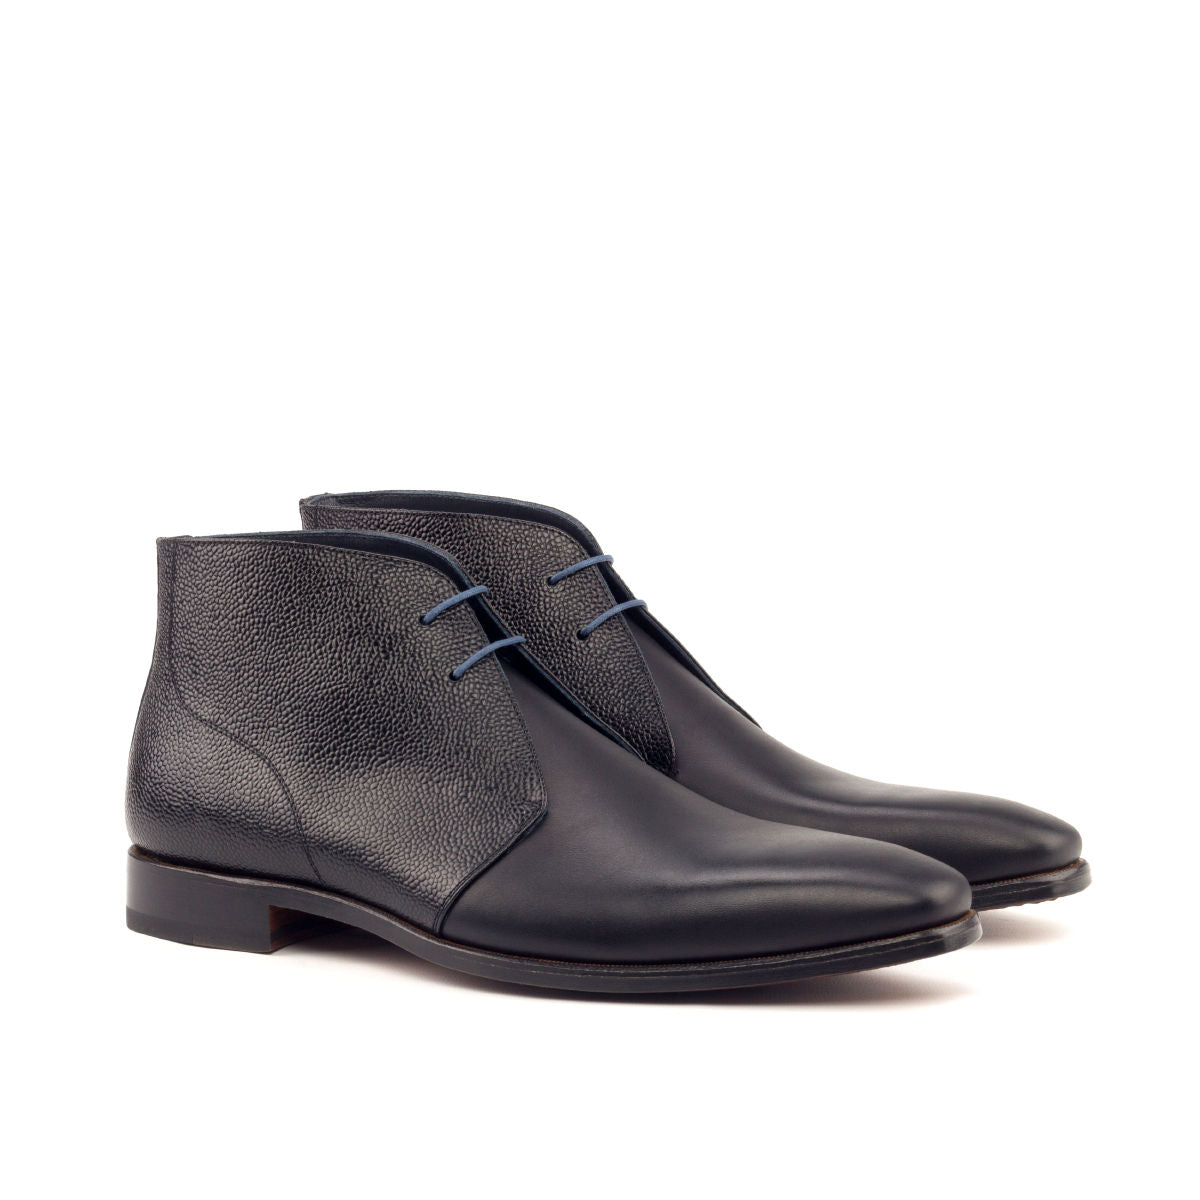 SUITCAFE Pebble Grain Men's Chukka Boot Black and Navy Leather